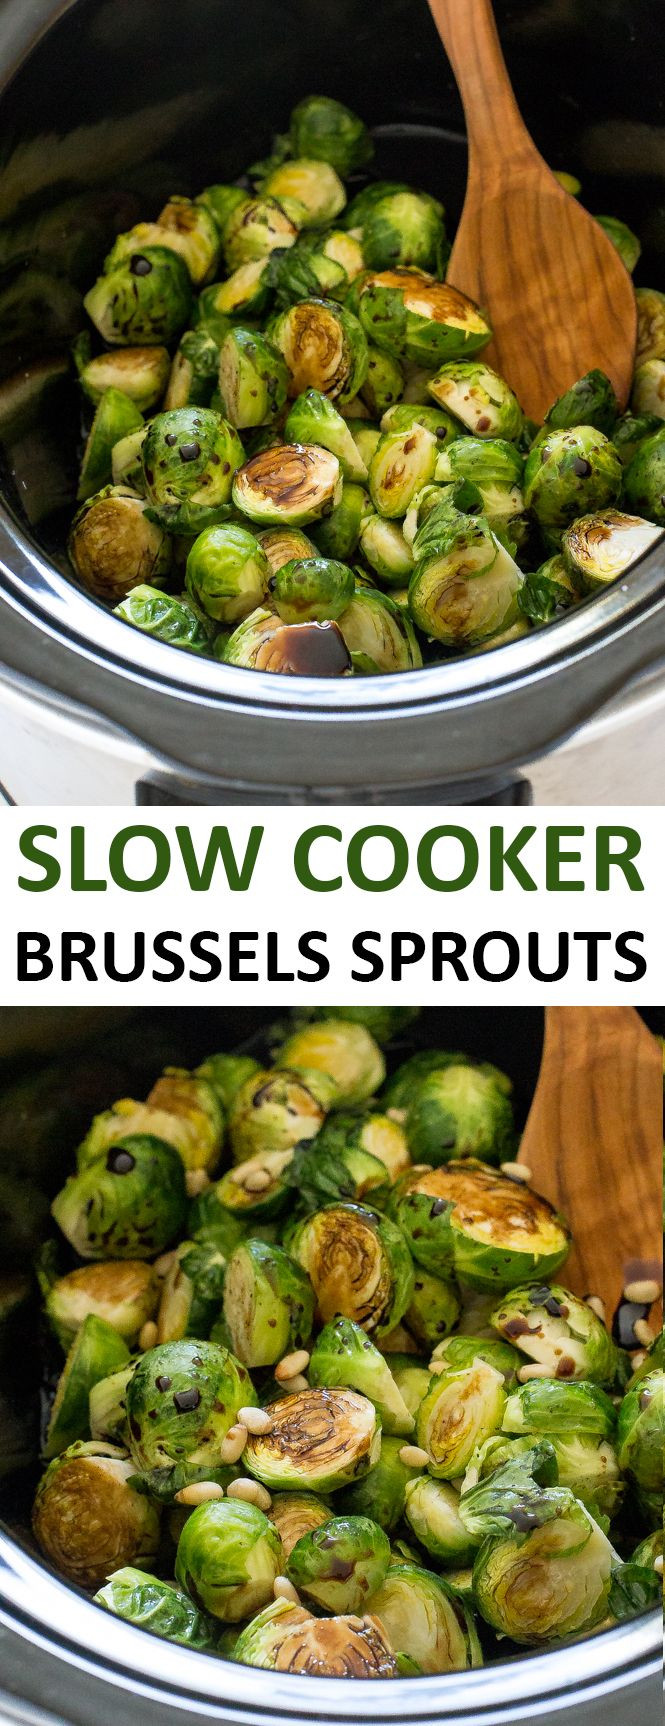 Thanksgiving Side Dishes Slow Cooker
 Slow Cooker Balsamic Brussels Sprouts Recipe